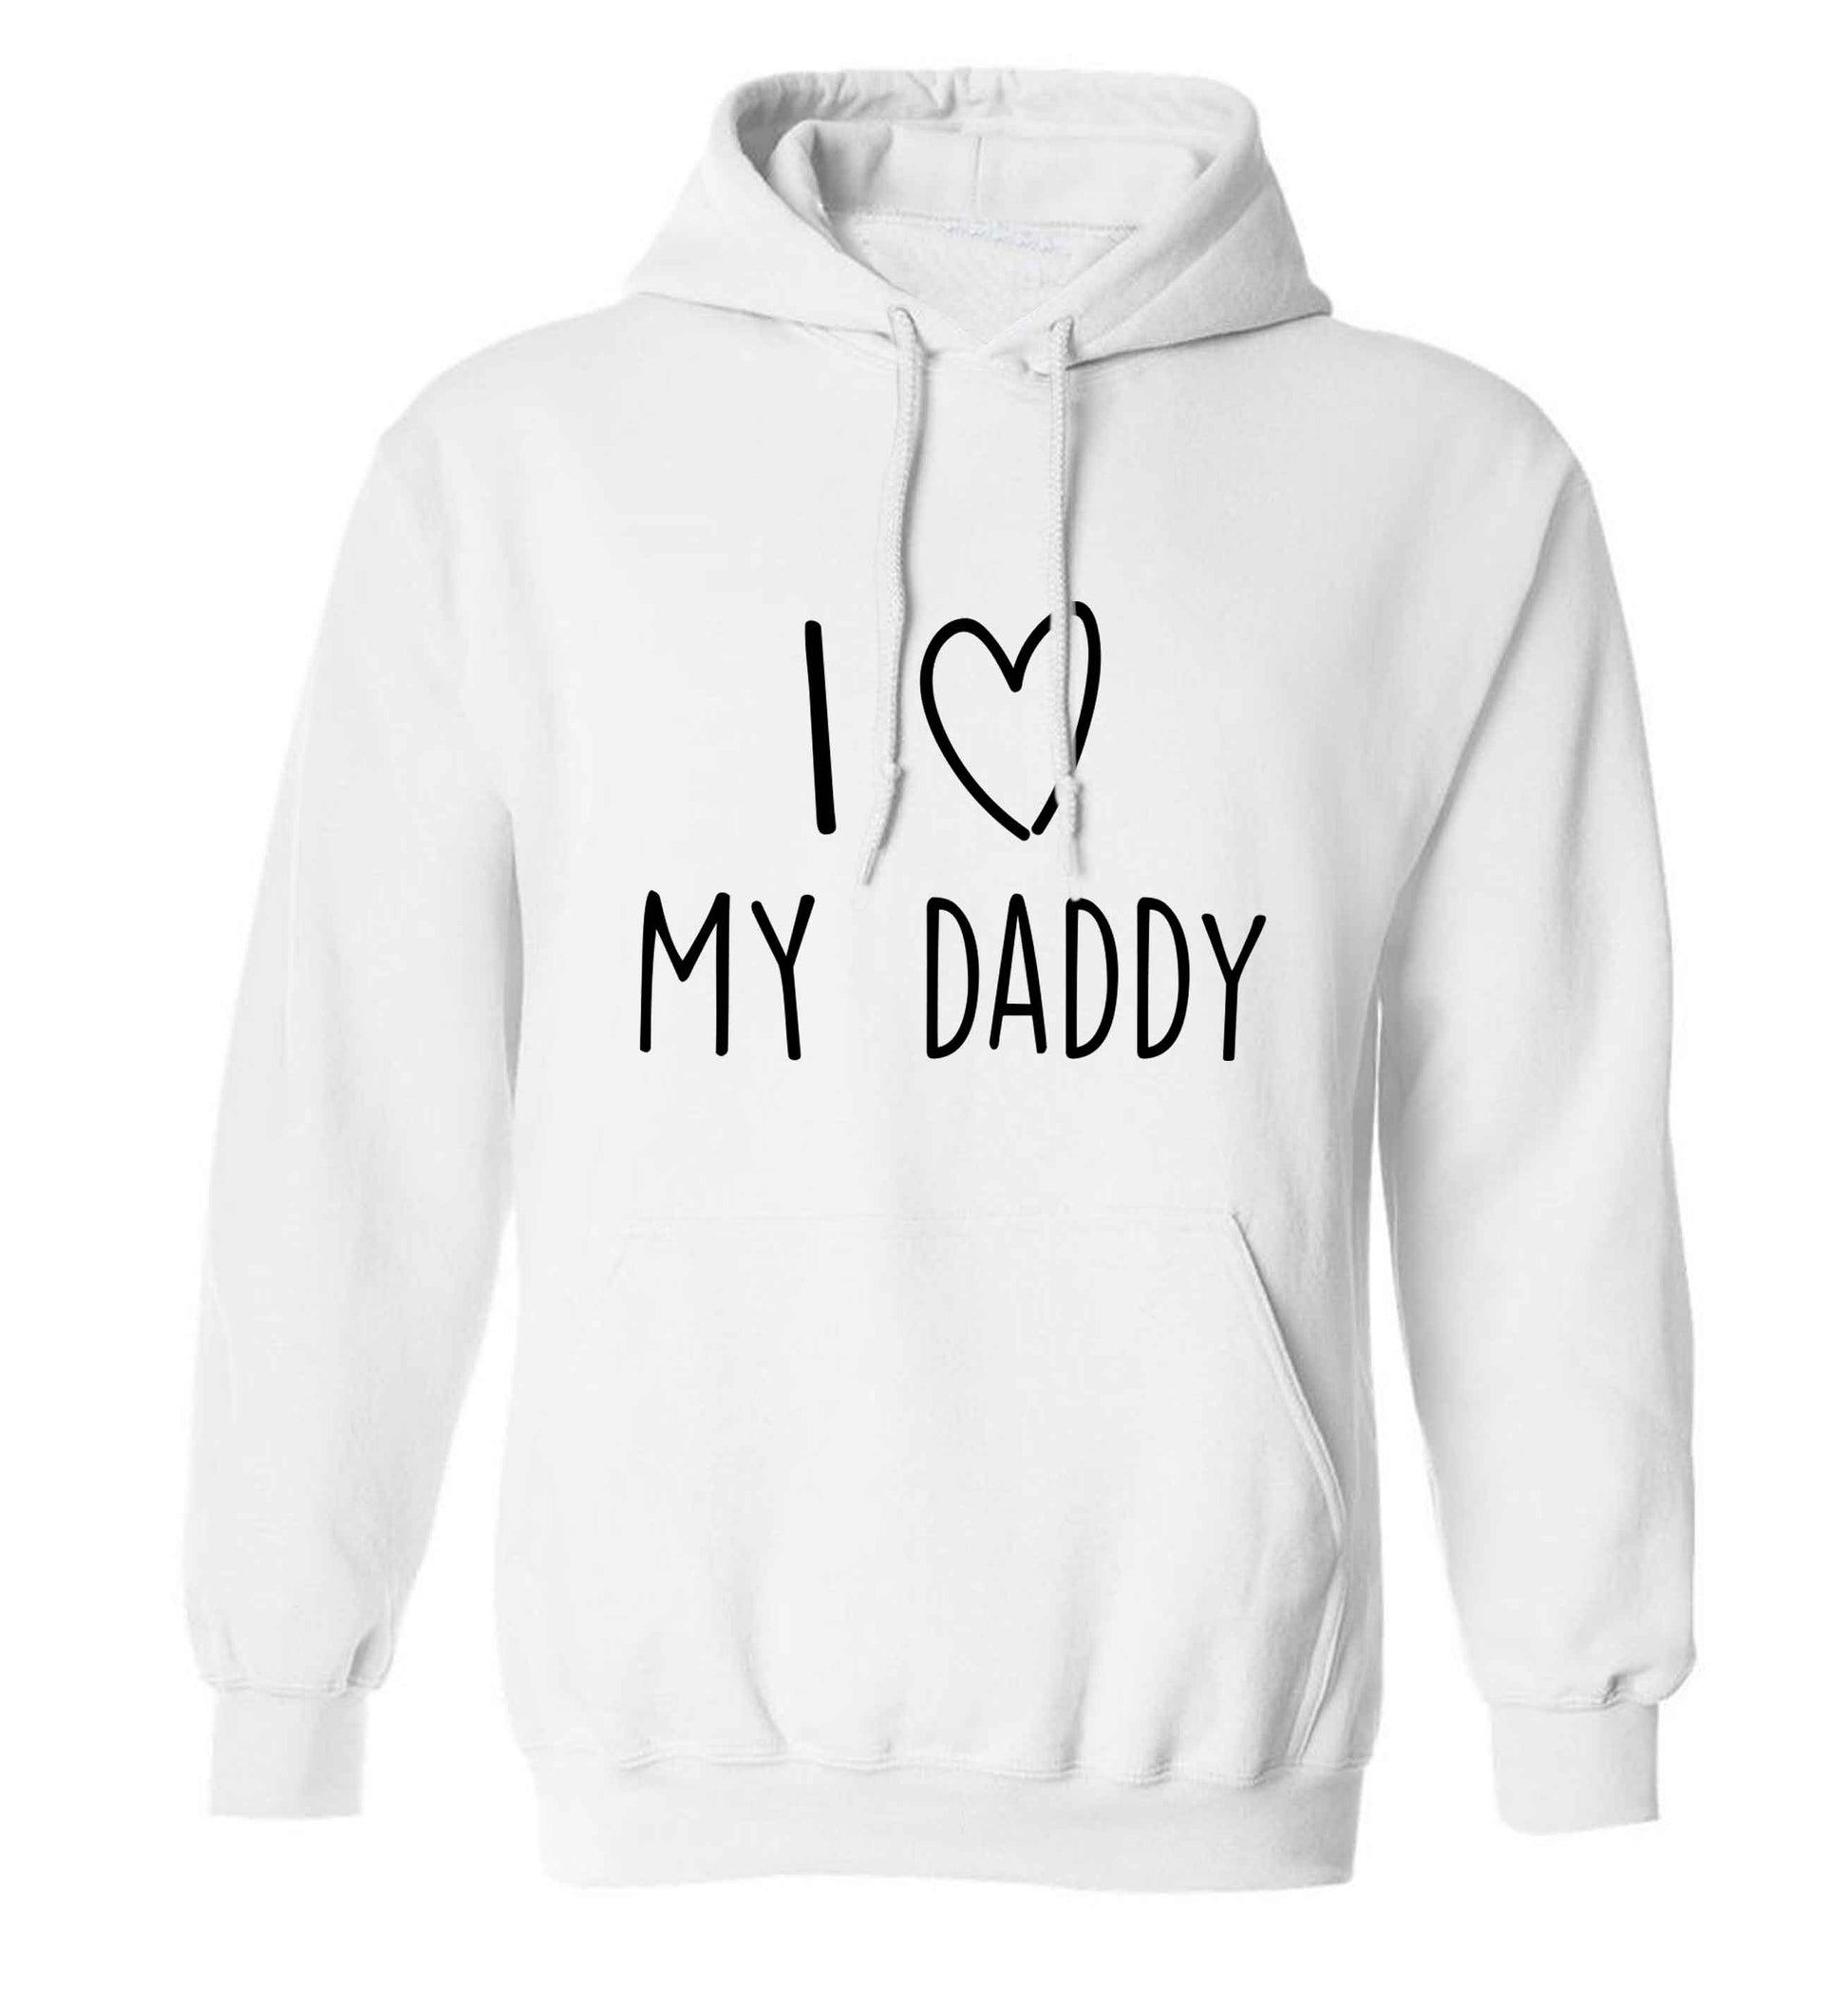 I love my daddy adults unisex white hoodie 2XL